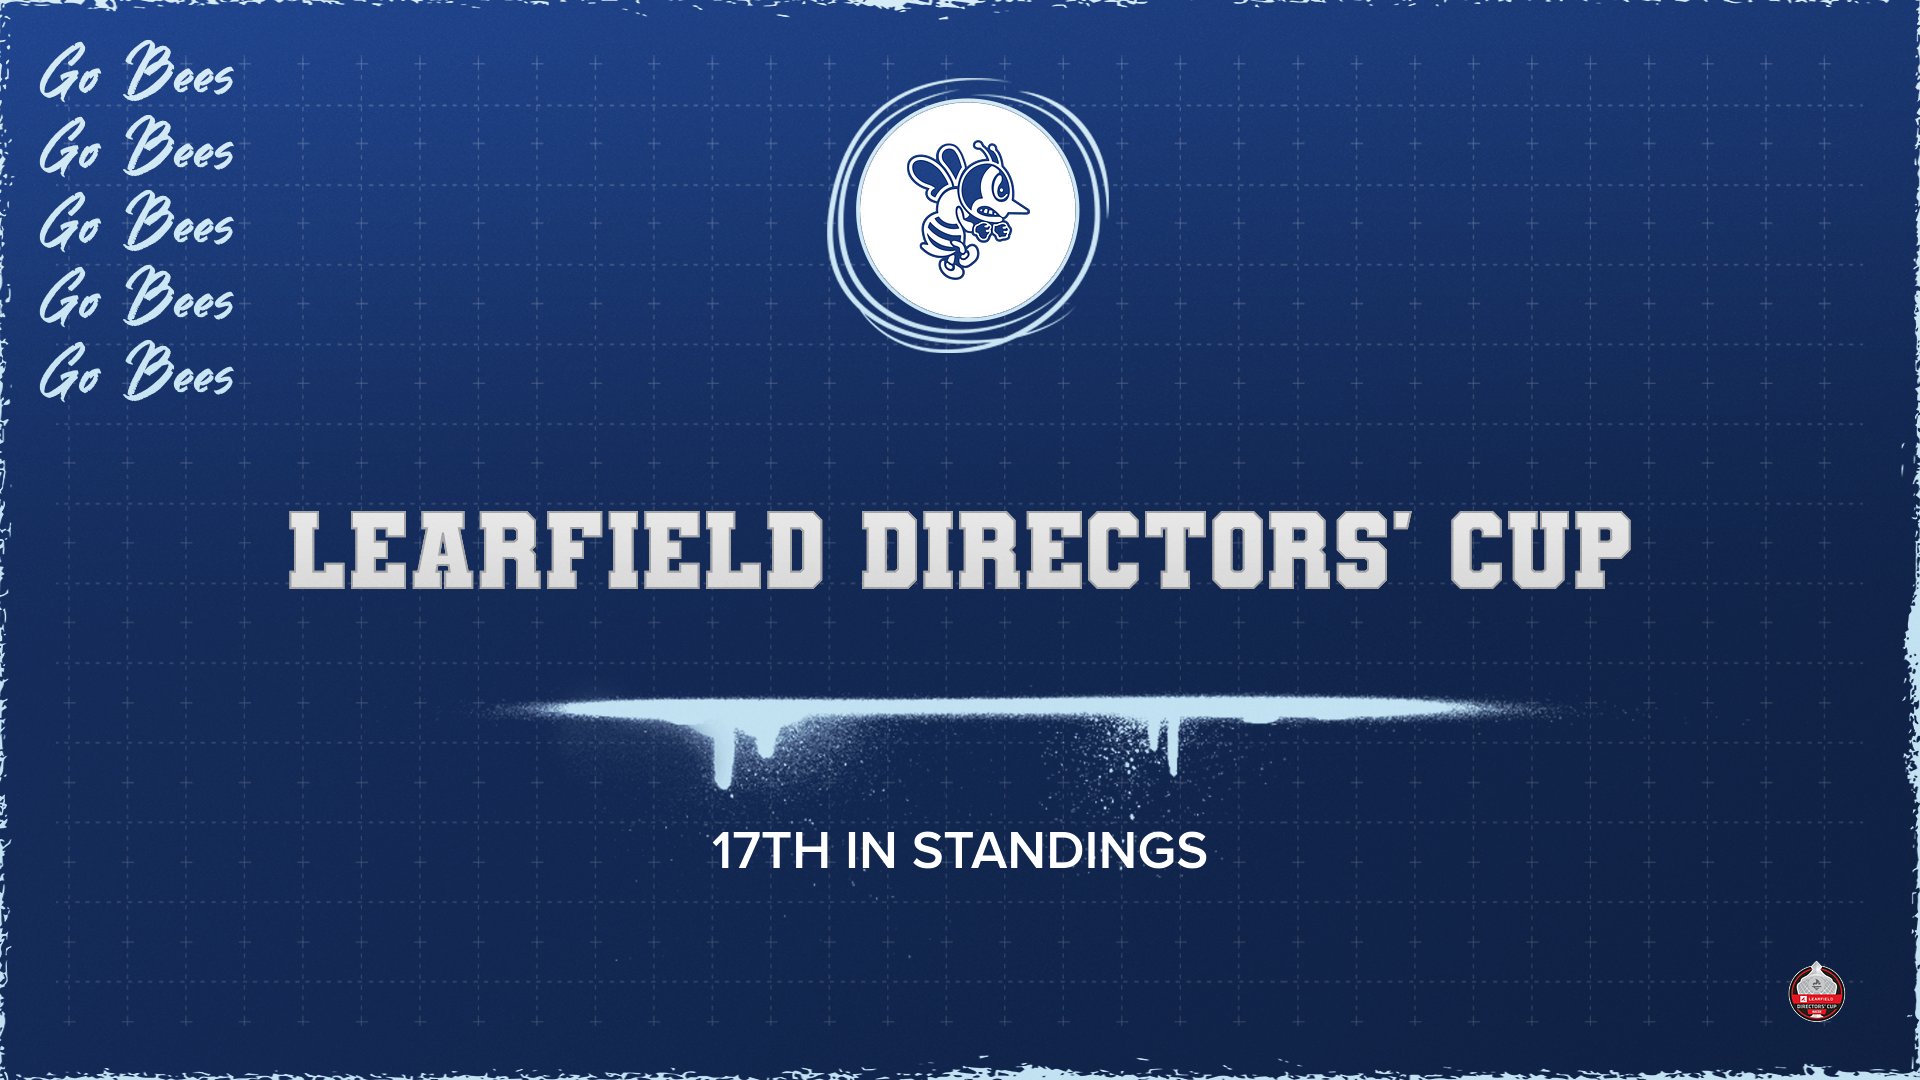 St. Ambrose places top 20 in the Learfield Directors' Cup standings